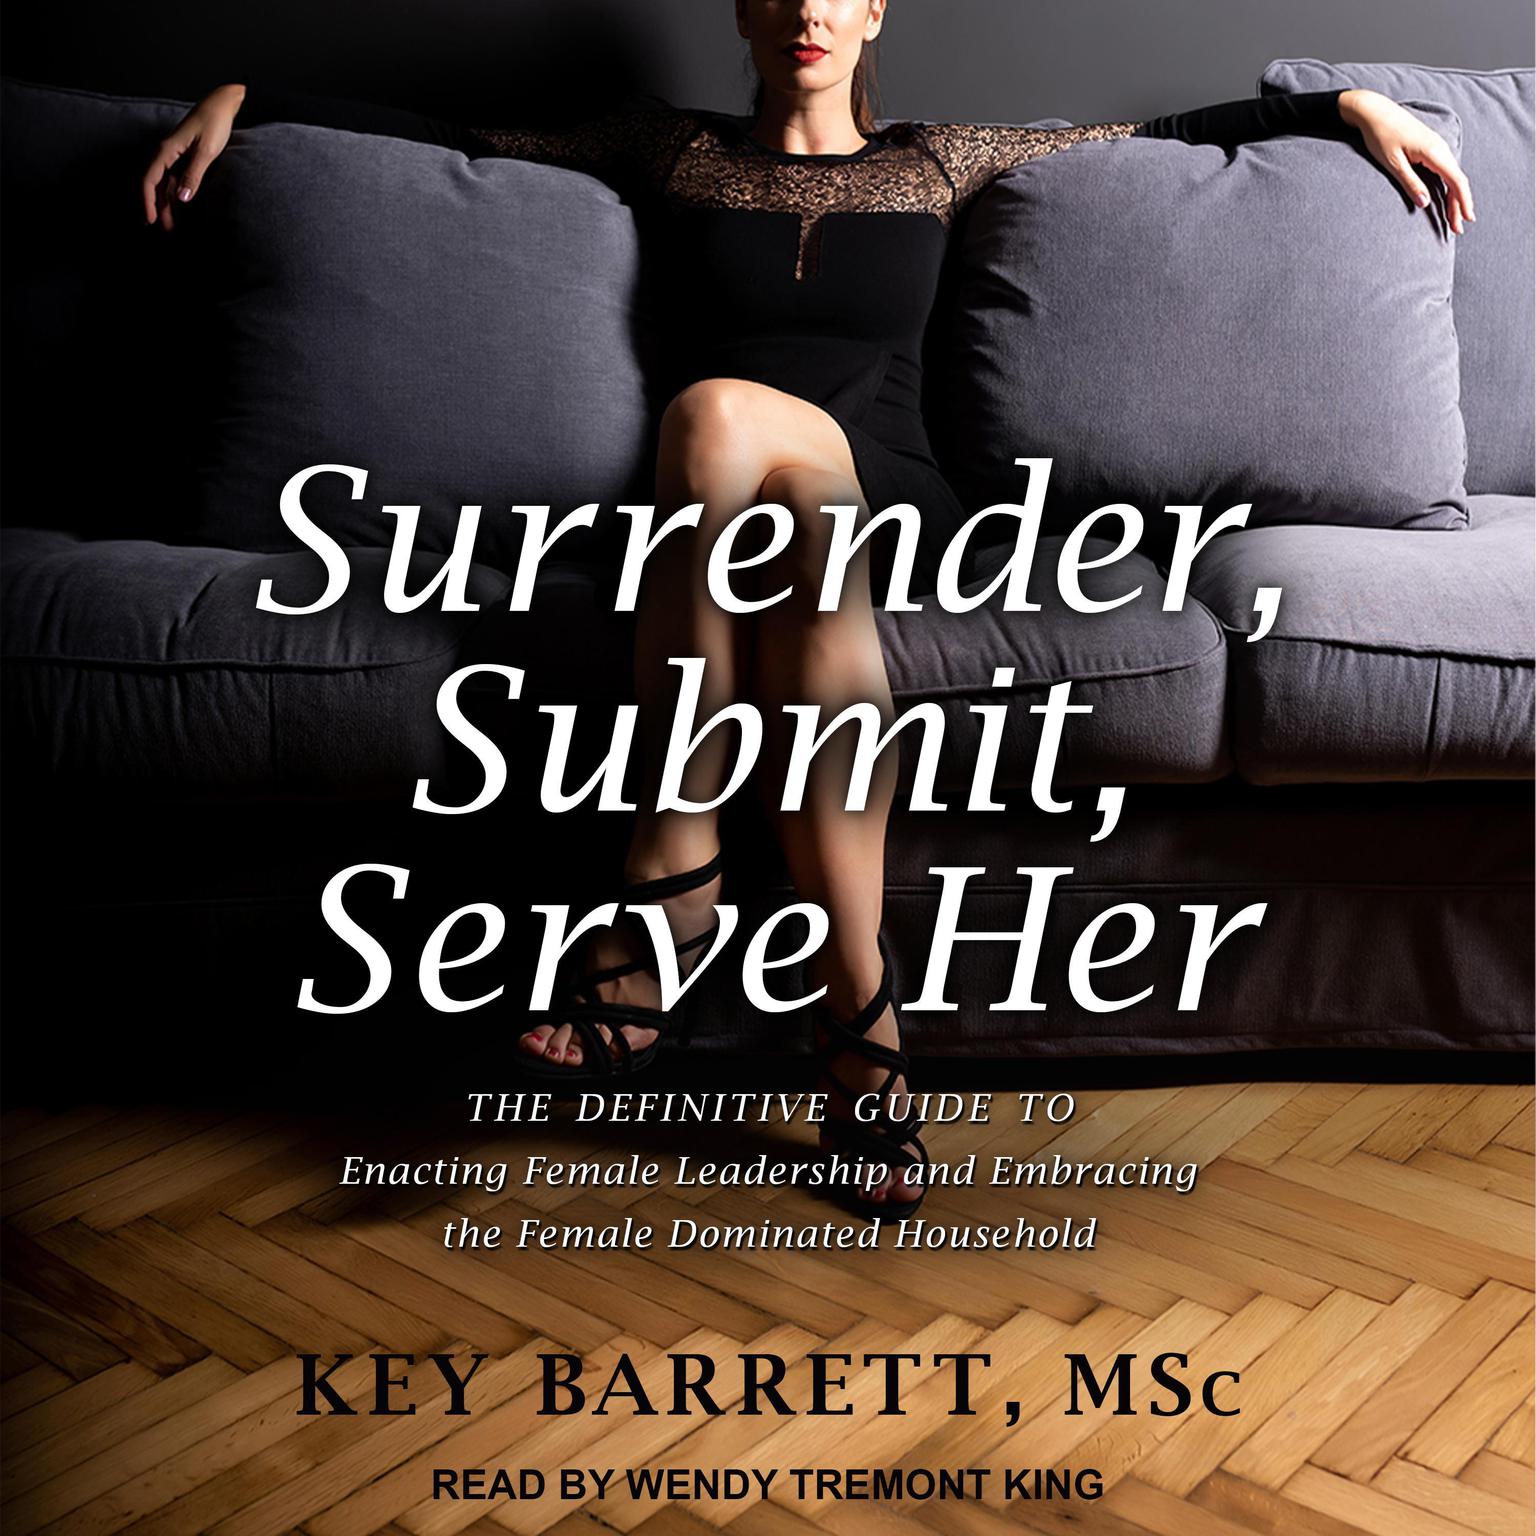 Surrender, Submit, Serve Her: The Definitive Guide to Enacting Female Leadership and Embracing the Female Dominated Household Audiobook, by Kerry Barrett